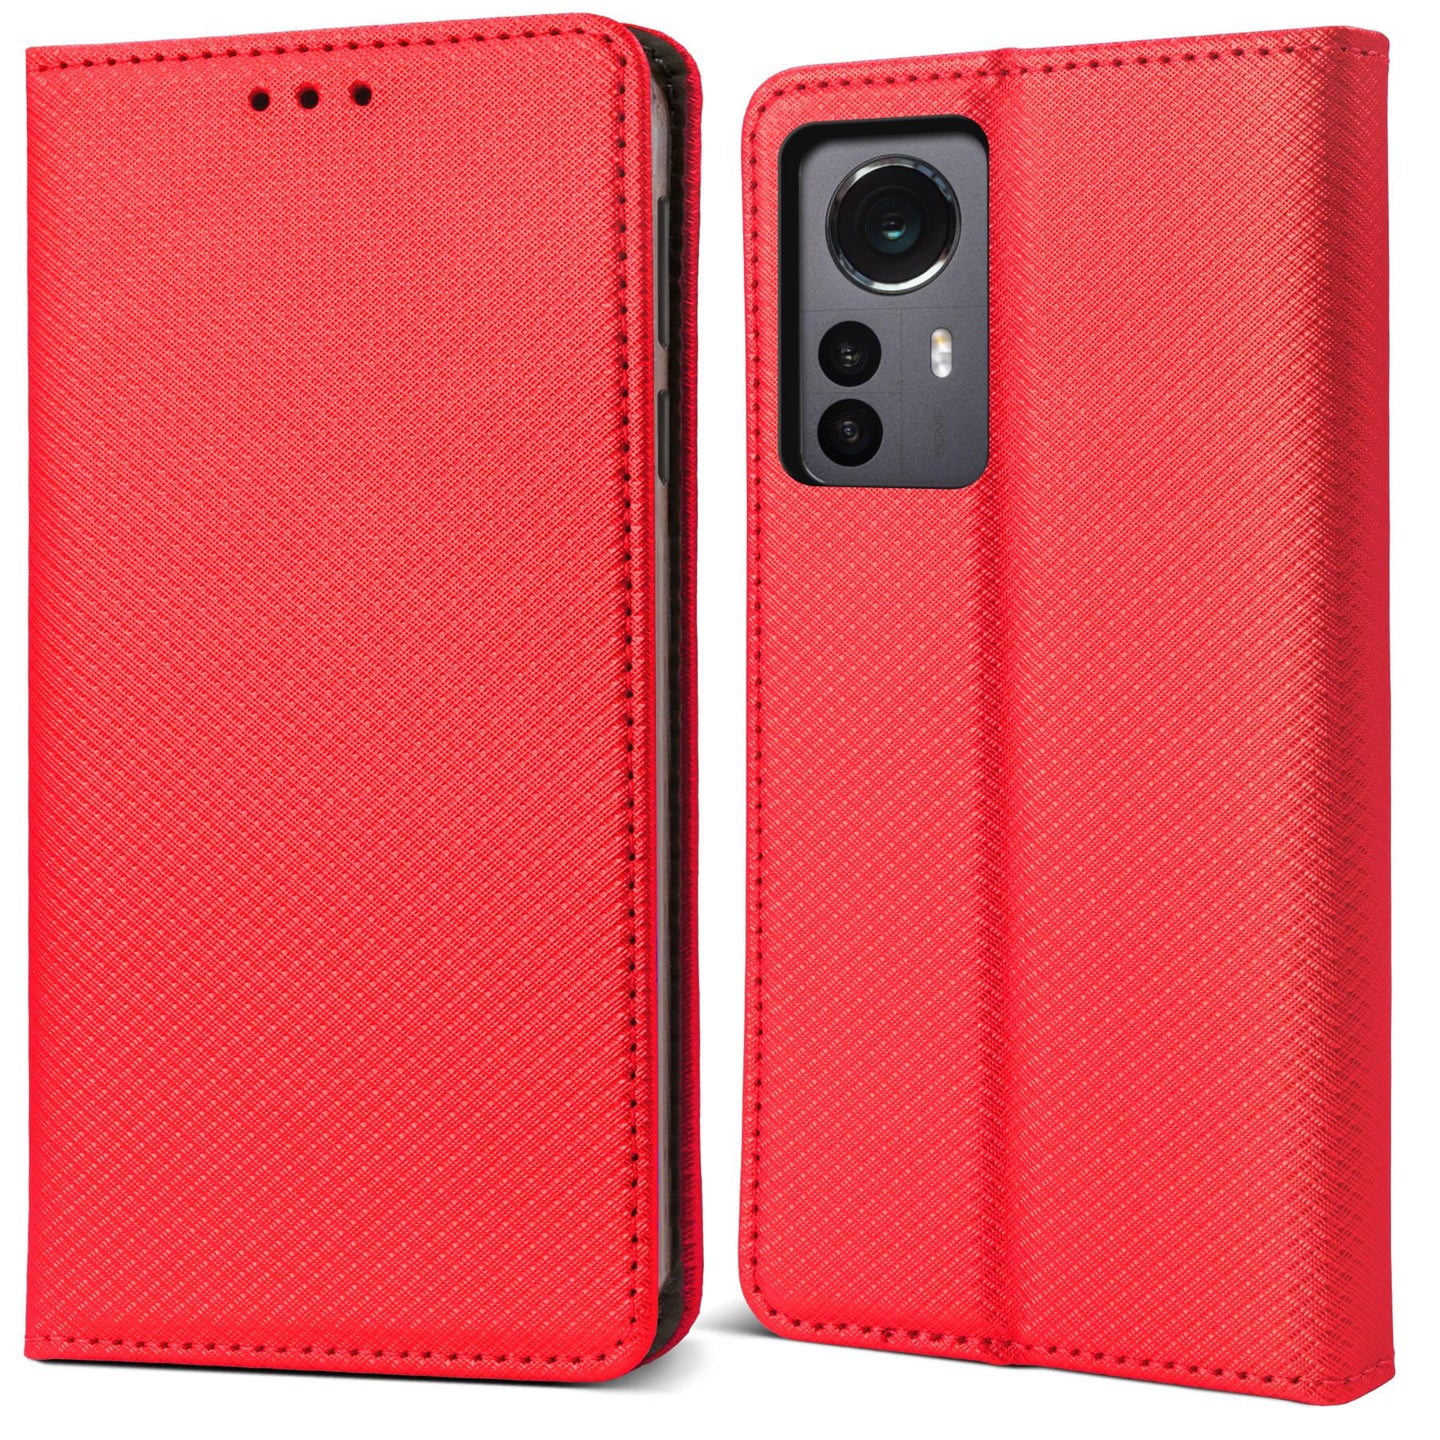 Moozy Case Flip Cover for Xiaomi 12 Pro, Red - Smart Magnetic Flip Case Flip Folio Wallet Case with Card Holder and Stand, Credit Card Slots, Kickstand Function